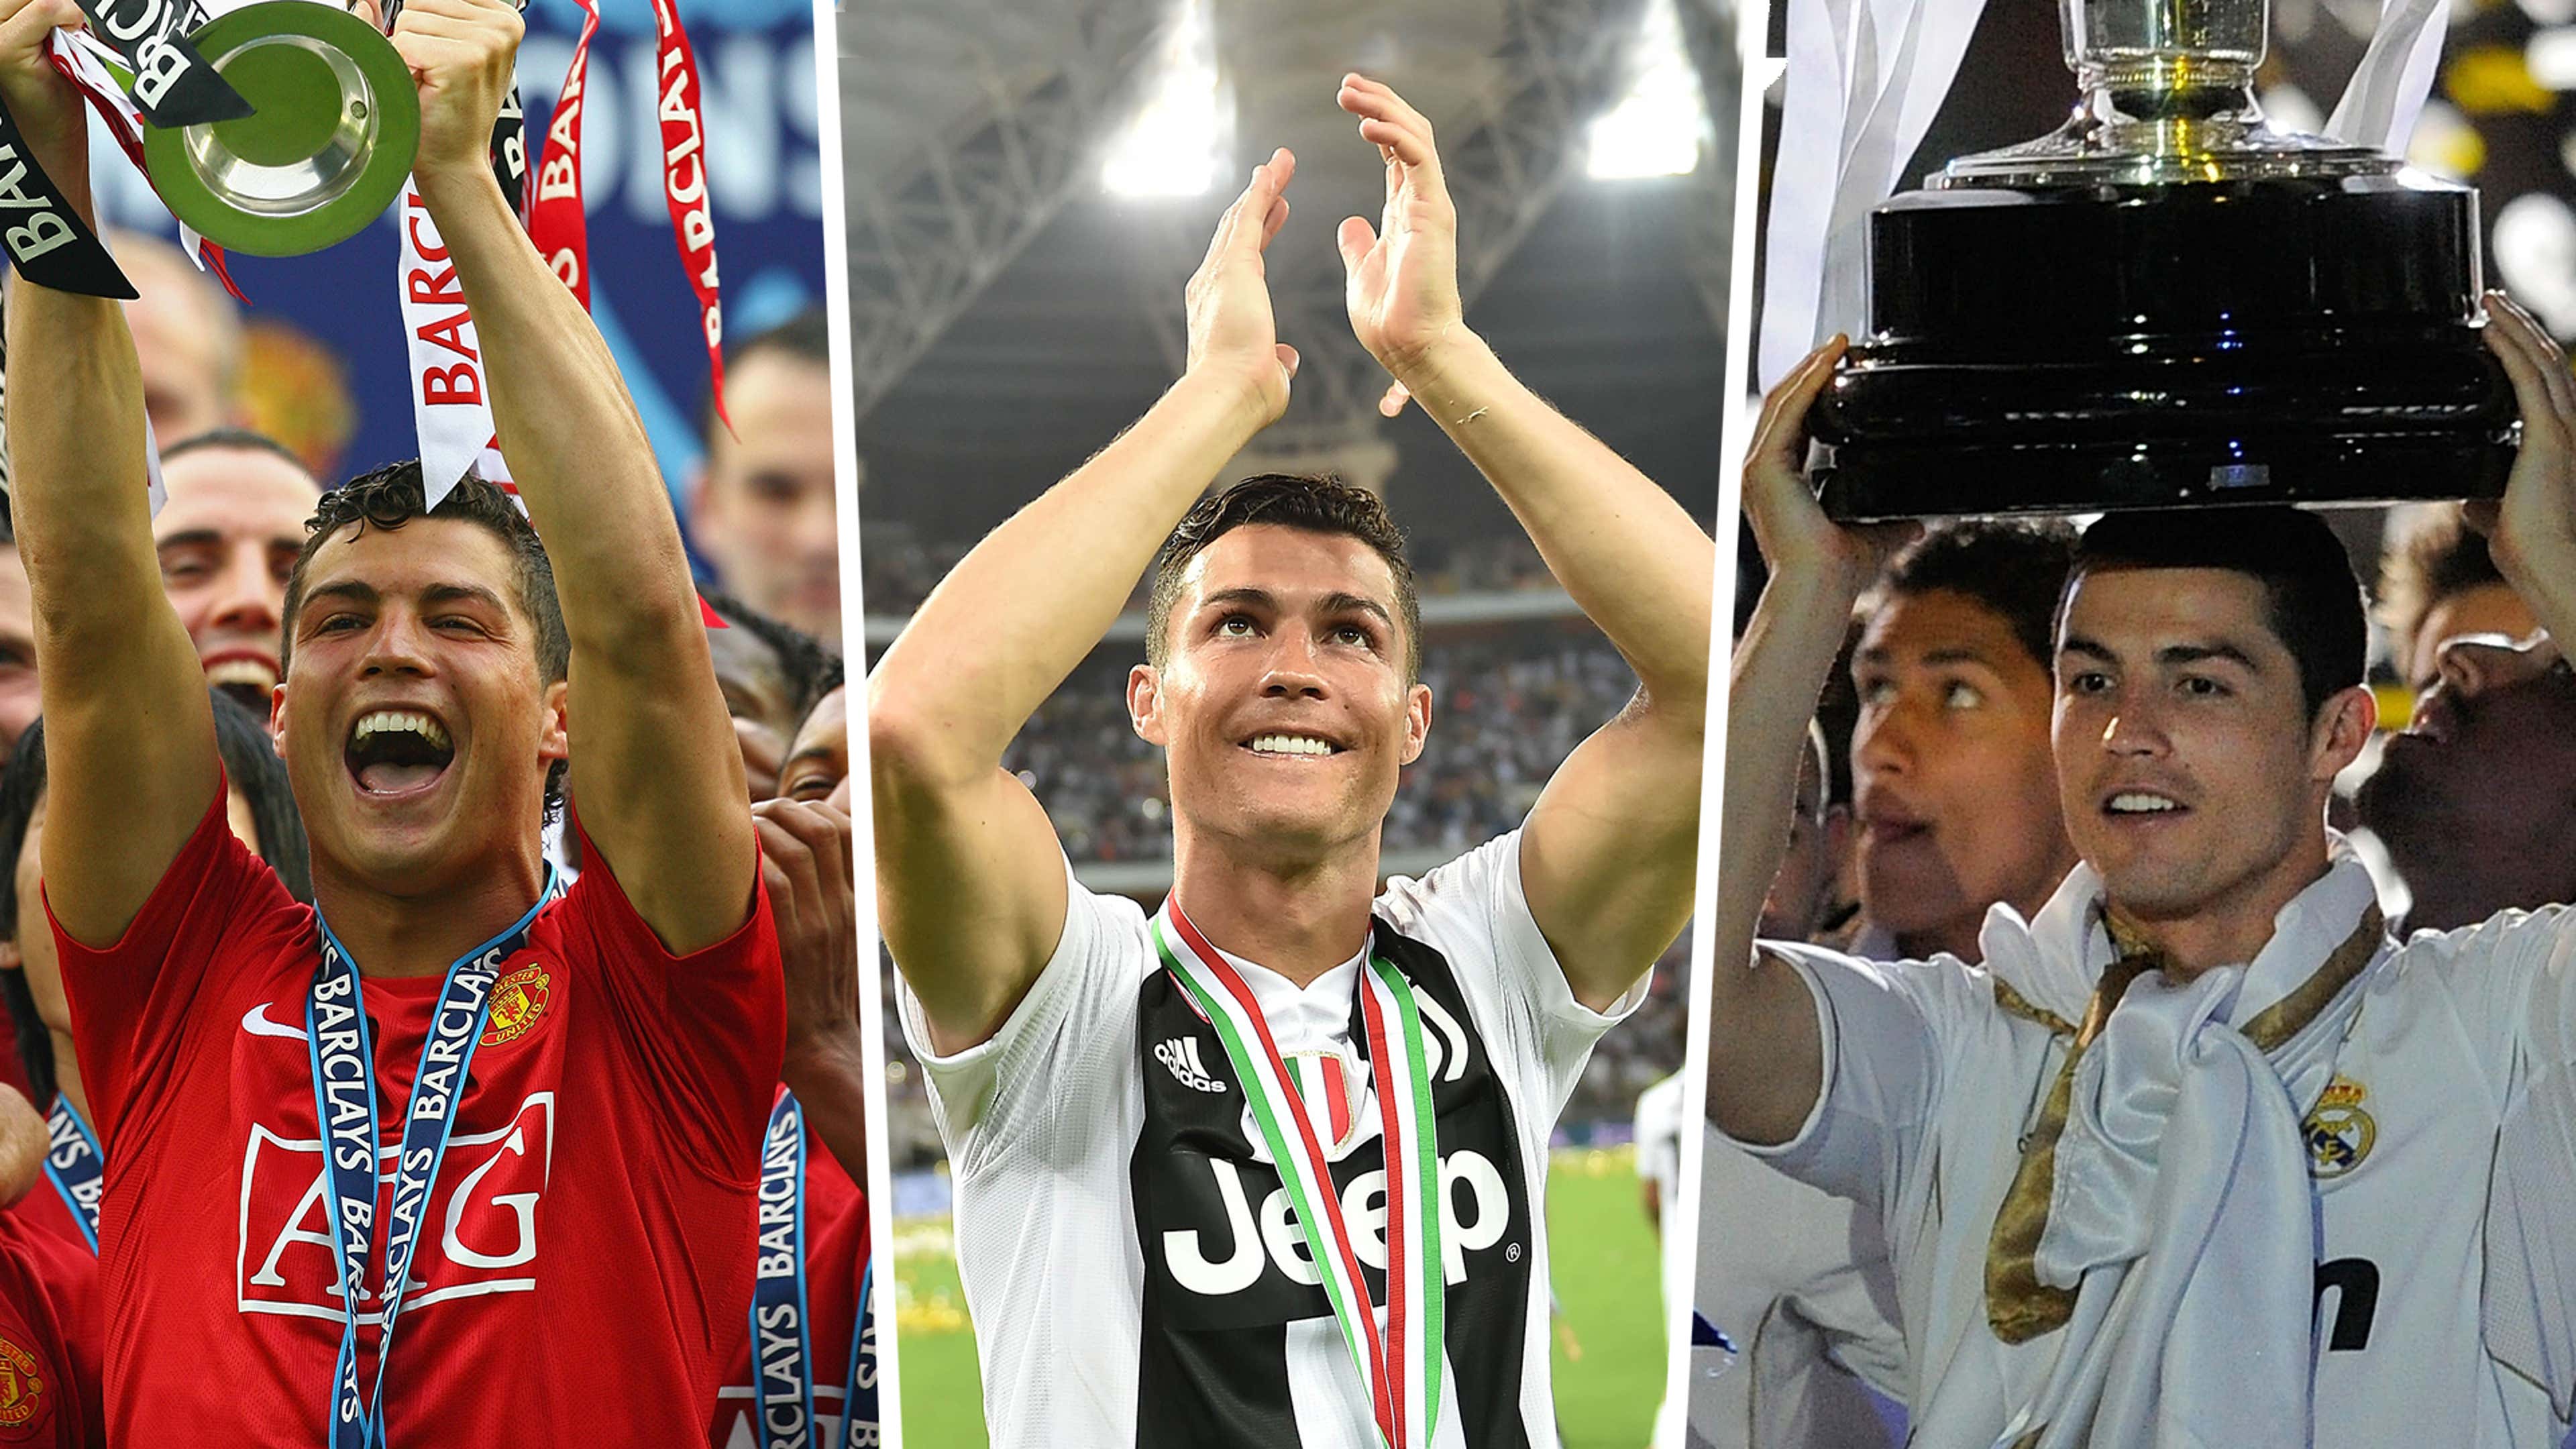 Cristiano Ronaldo becomes first player to win Europe's top 3 leagues